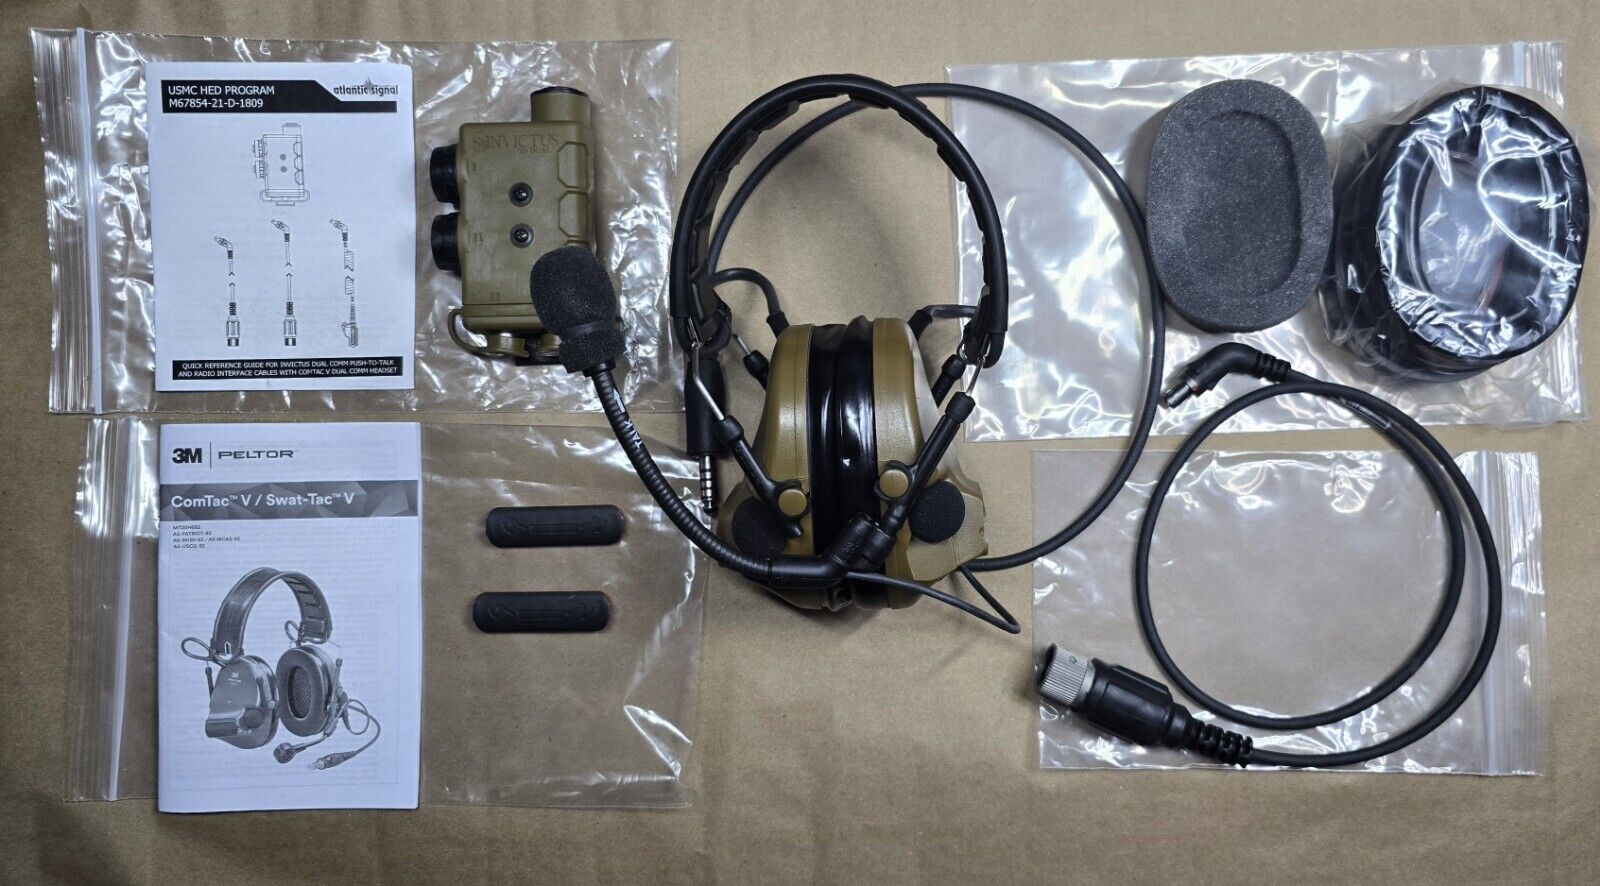 New 3M Peltor ComTac V Dual Comm Capable, With Accessories